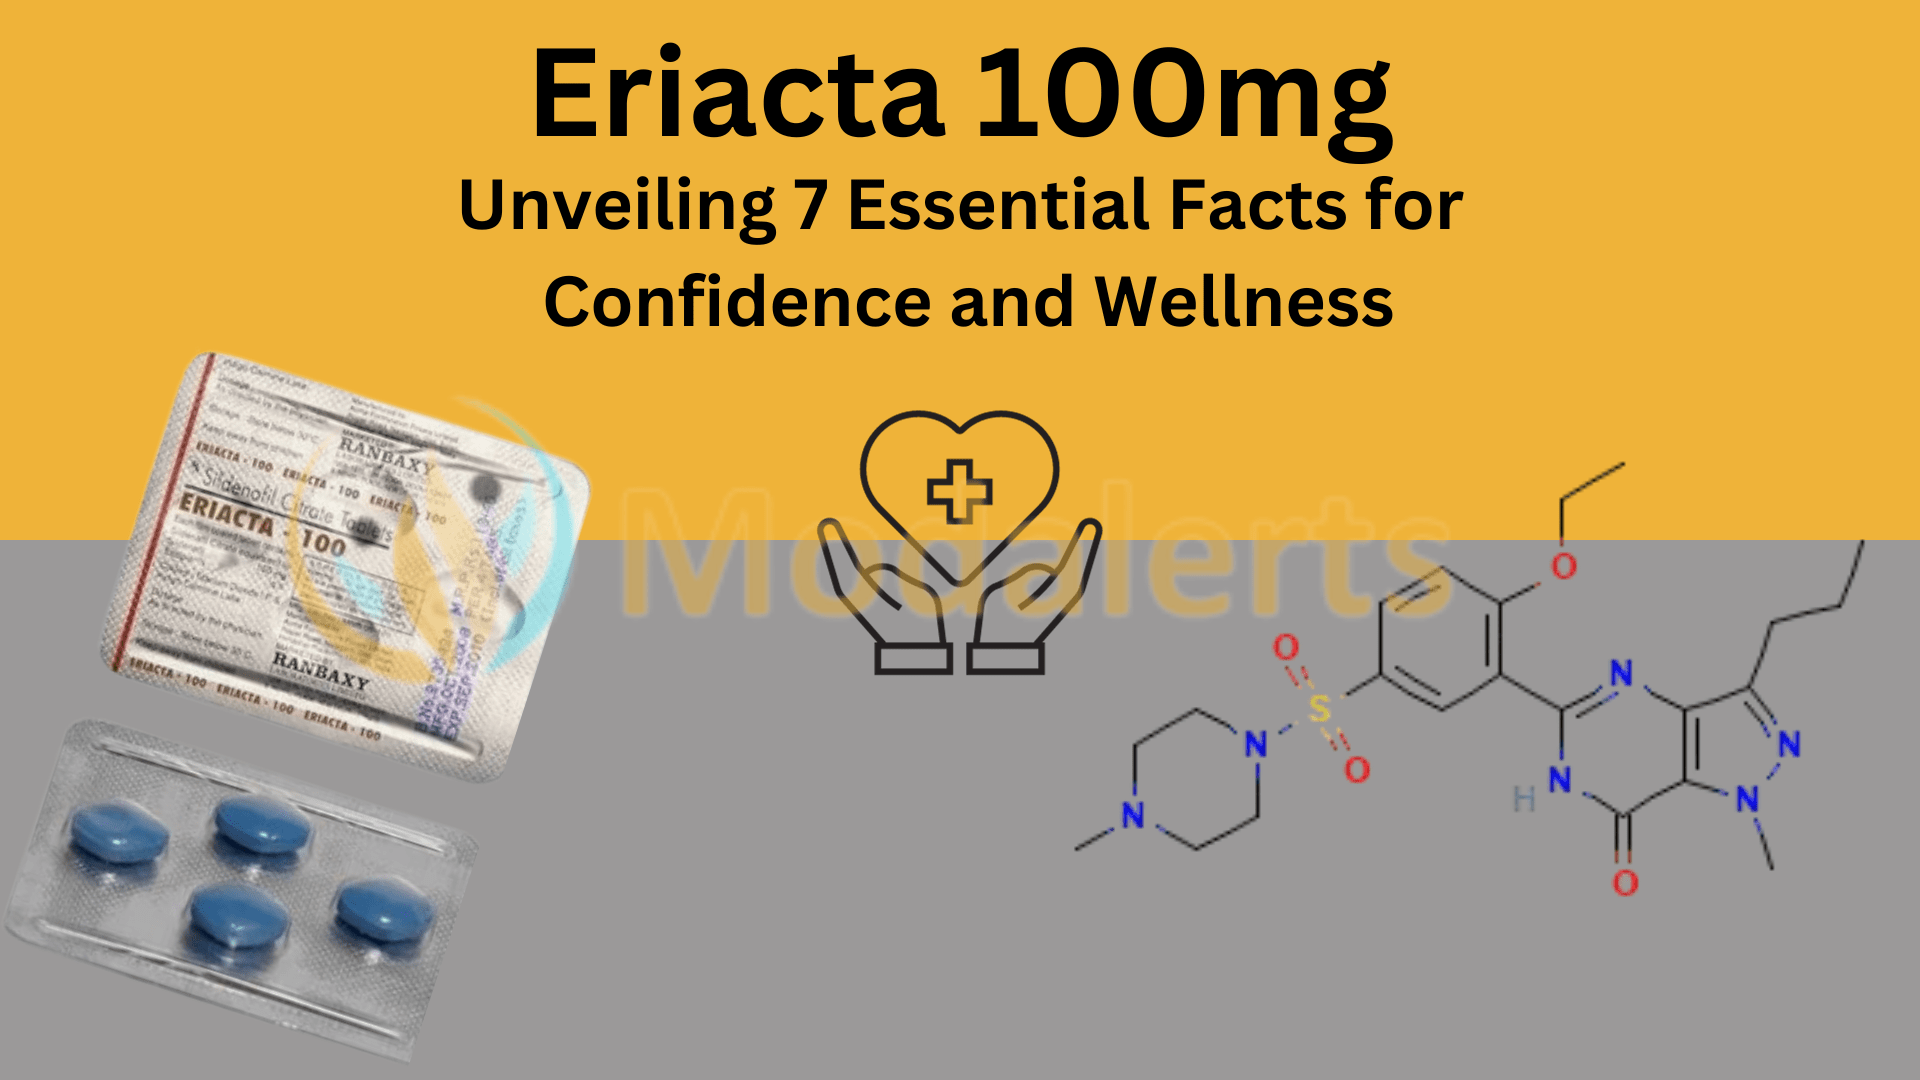 Eriacta 100mg Ranbaxy with molecular structure of sildenafil citrate.